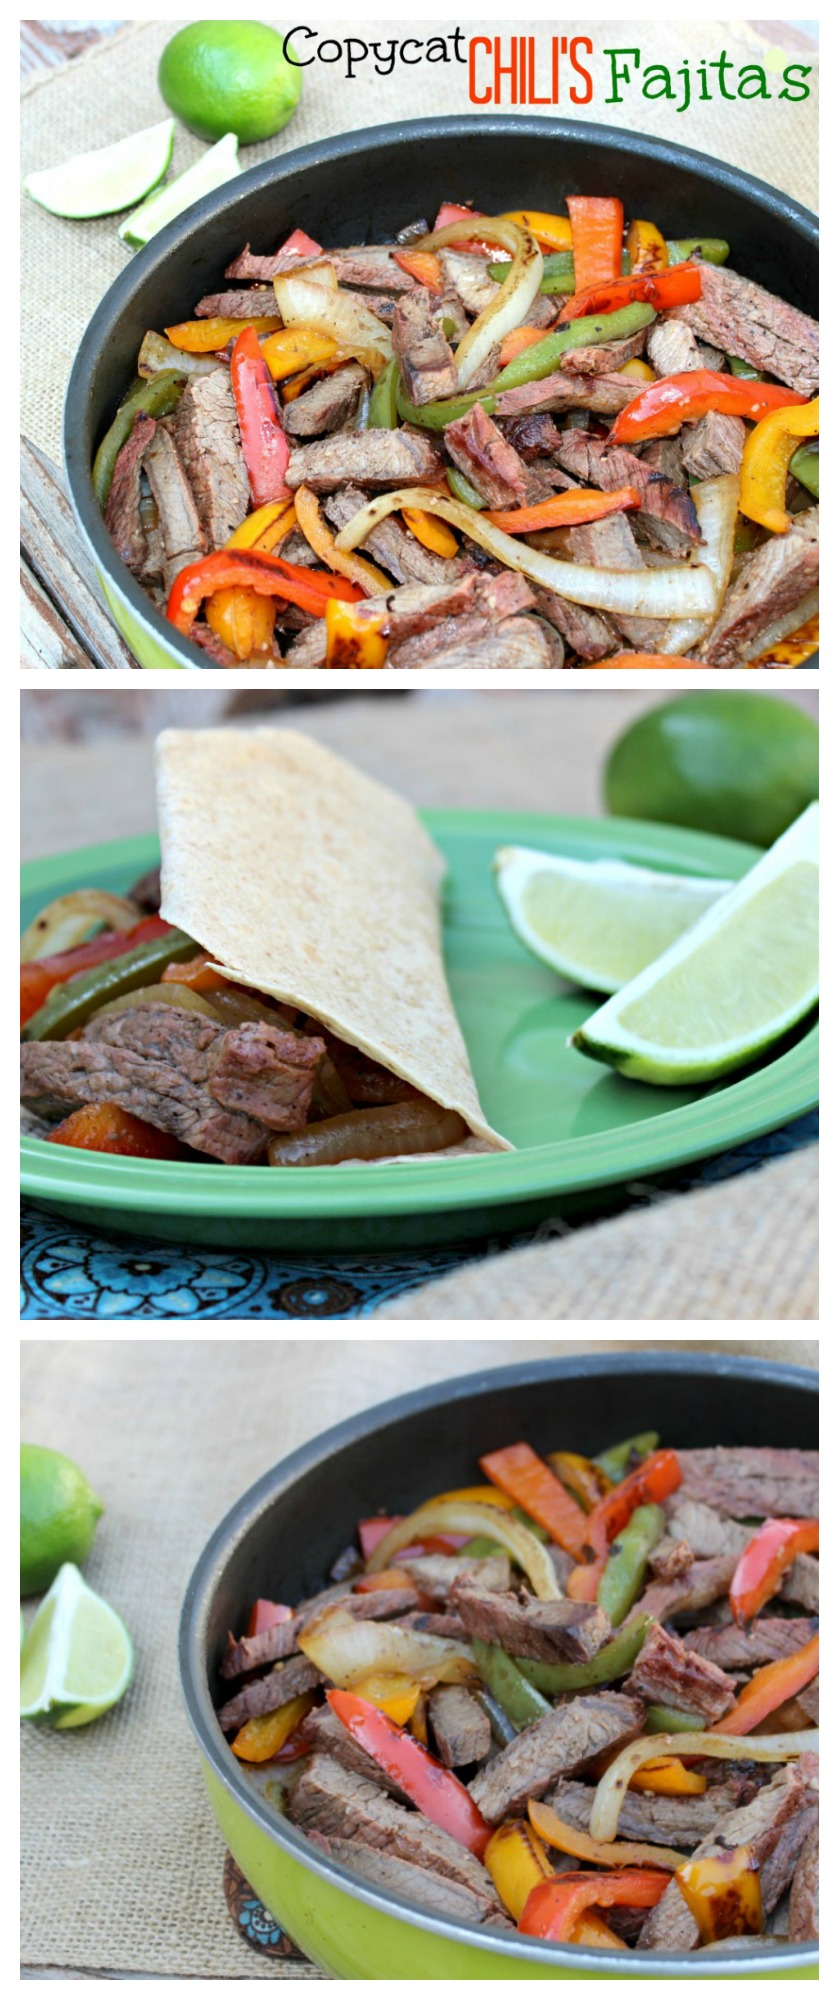 With this Copycat Chili's Steak Fajitas Recipe you can make your favorite Mexican restaurant meal at home! The secret is in the yummy marinade and cooking on the grill.